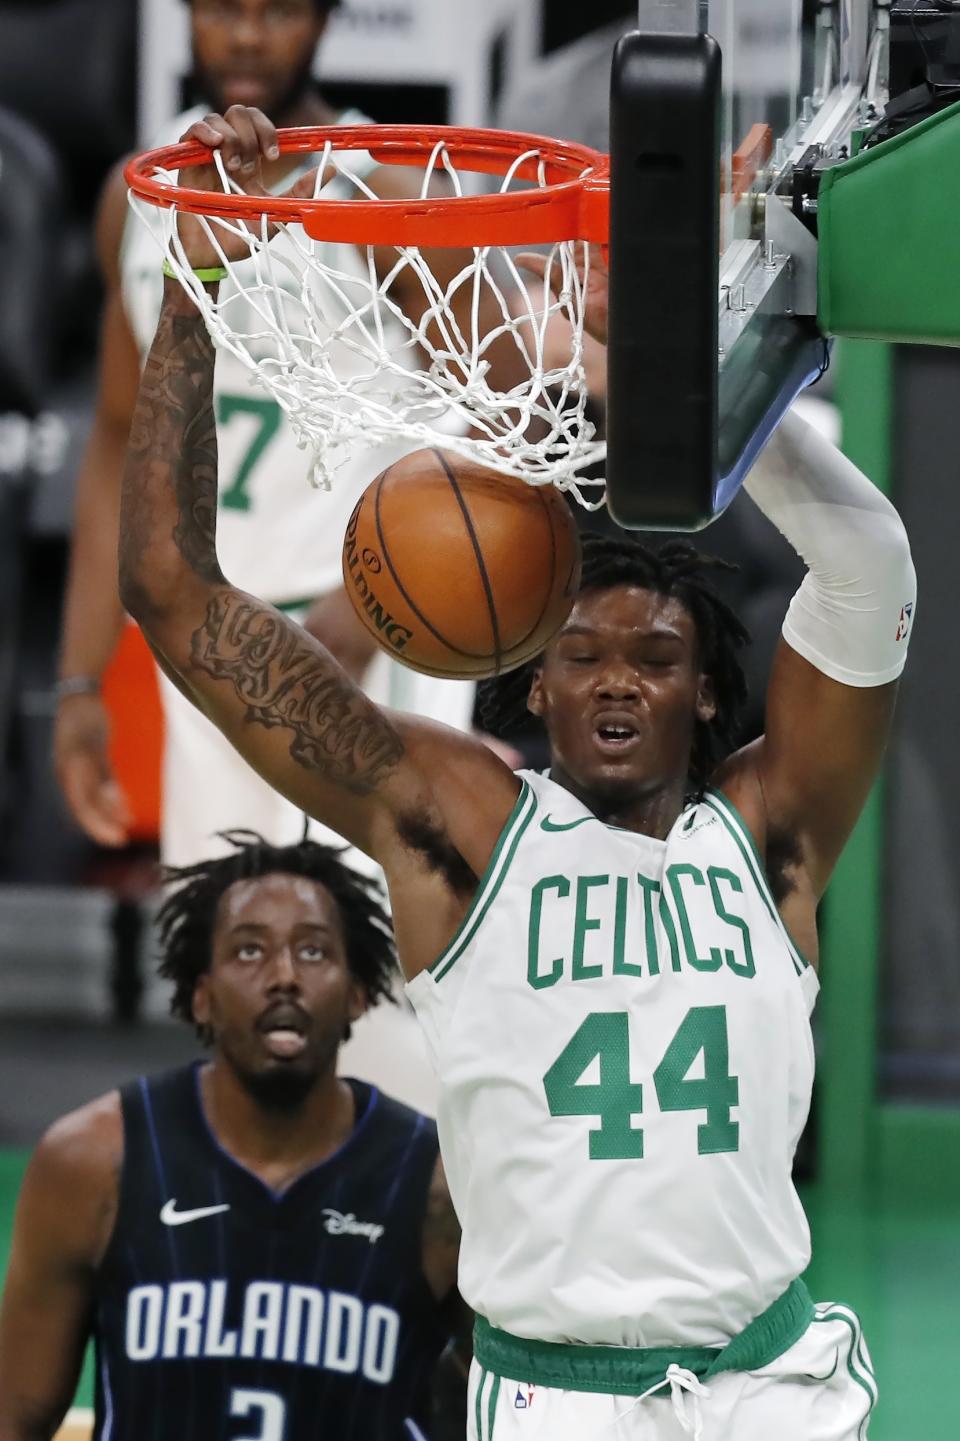 Boston Celtics' Robert Williams III (44) dunks in front of Orlando Magic's Al-Farouq Aminu during the first half of an NBA basketball game, Sunday, March 21, 2021, in Boston. (AP Photo/Michael Dwyer)